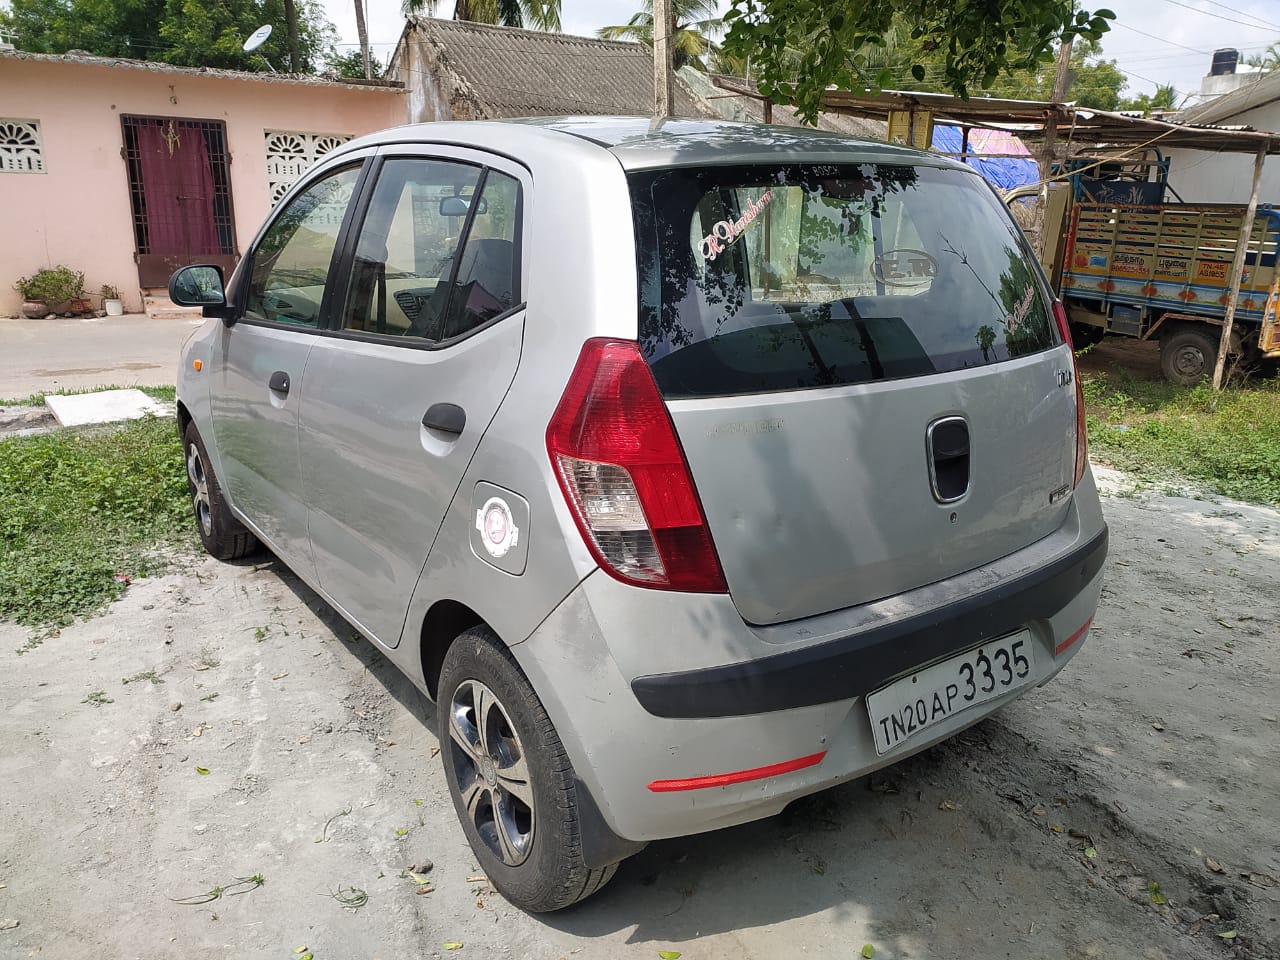 4744-for-sale-Hyundai-i10-Petrol-Third-Owner-2007-TN-registered-rs-115000